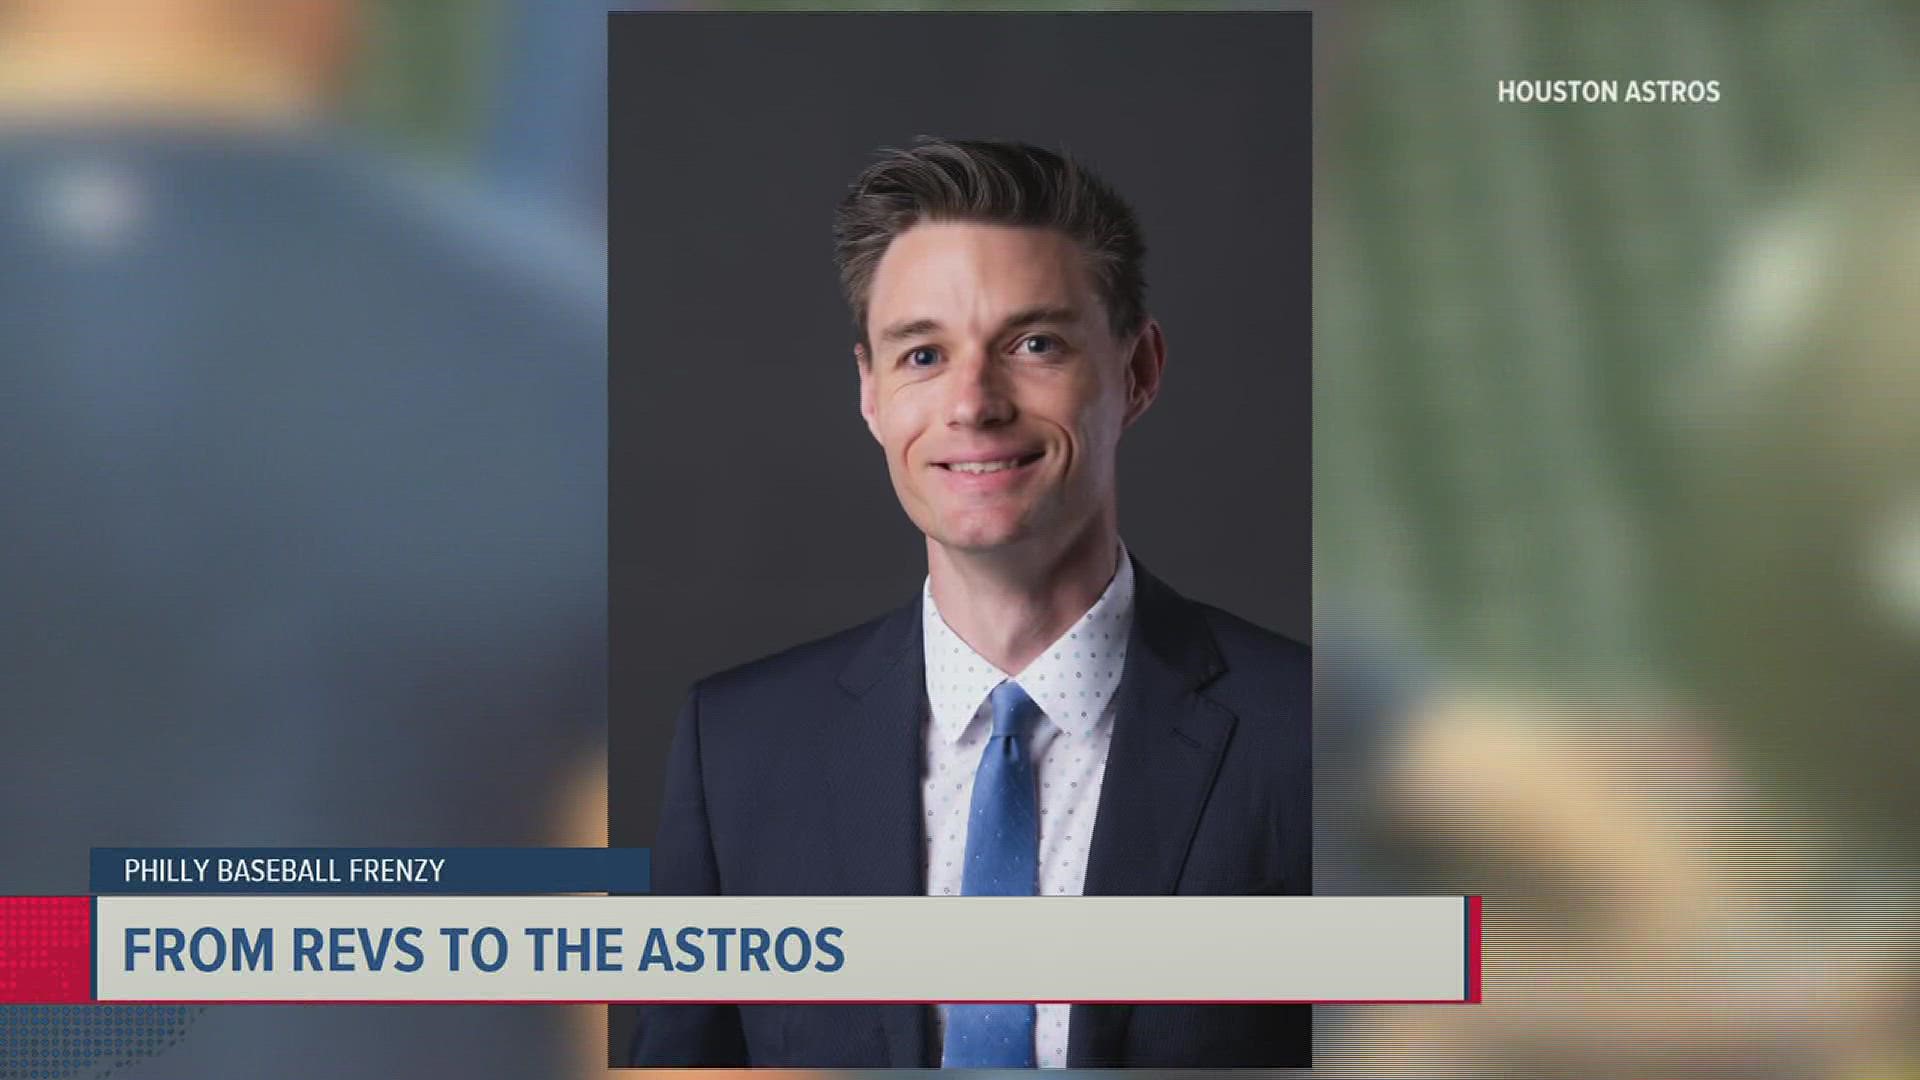 Andrew Ball had an internship with the Revs that started his career in baseball.